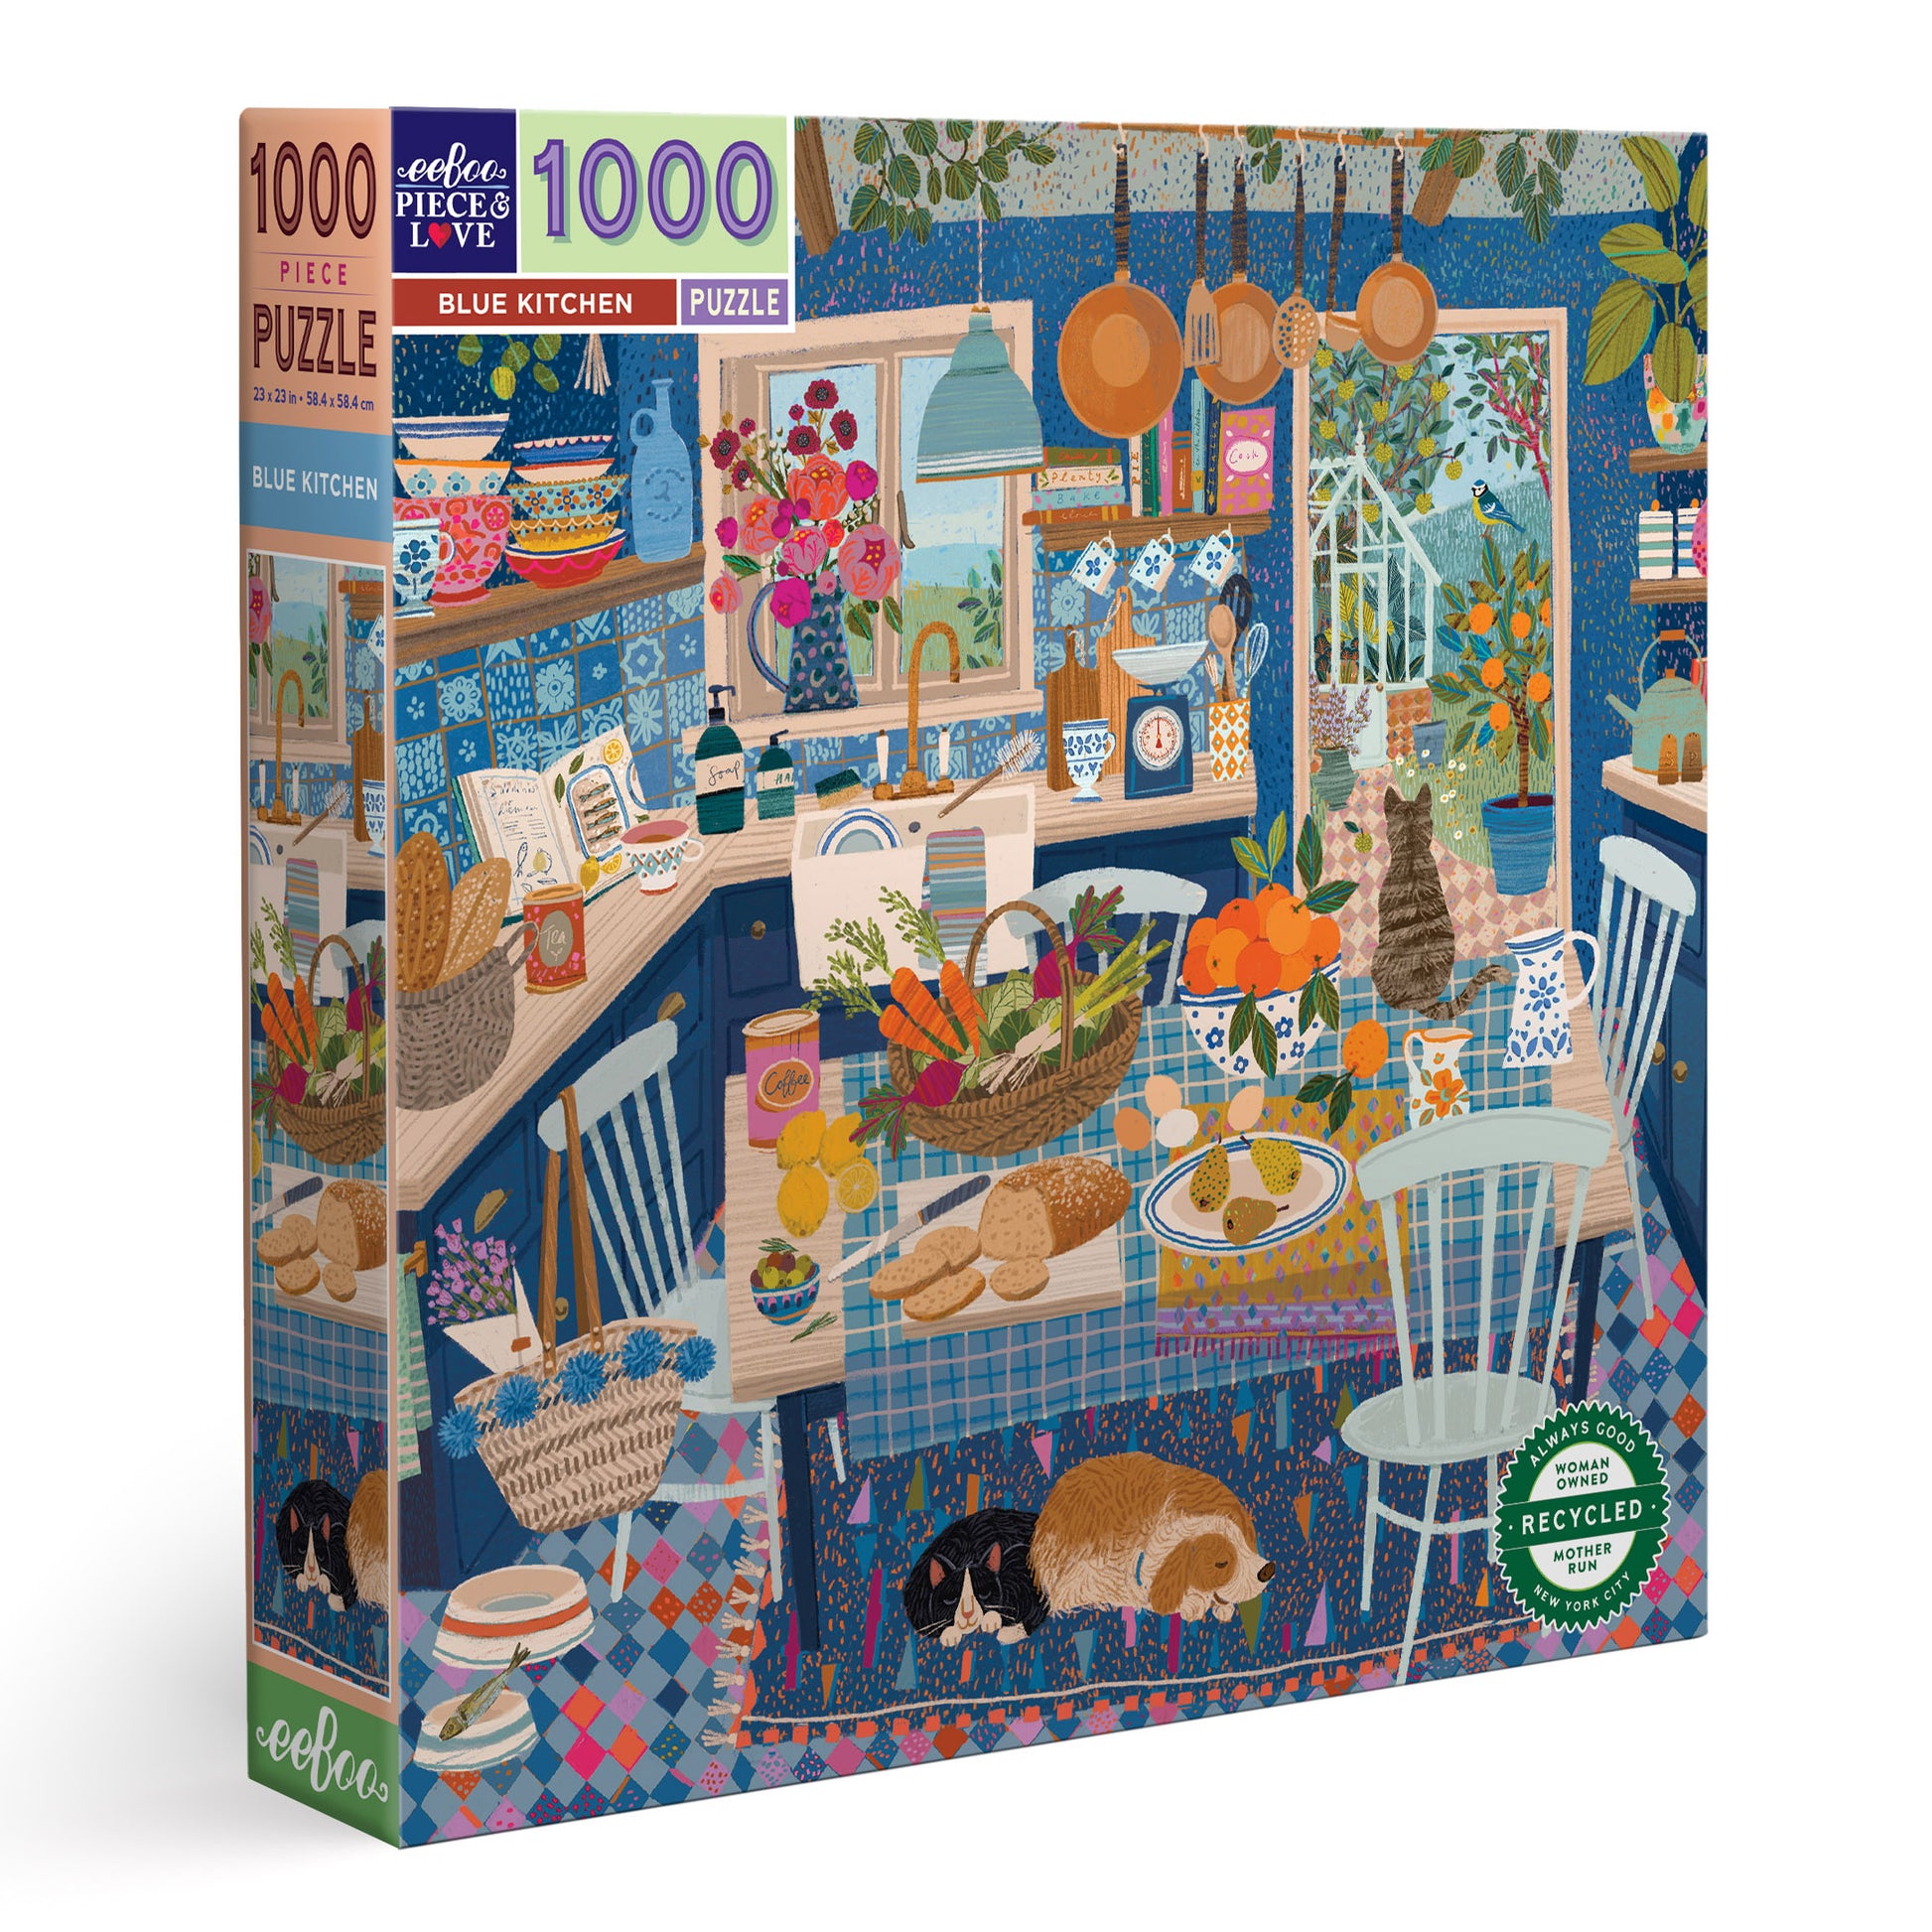 Blue Kitchen 1000 Piece Jigsaw Puzzle eeBoo Gifts for Adults